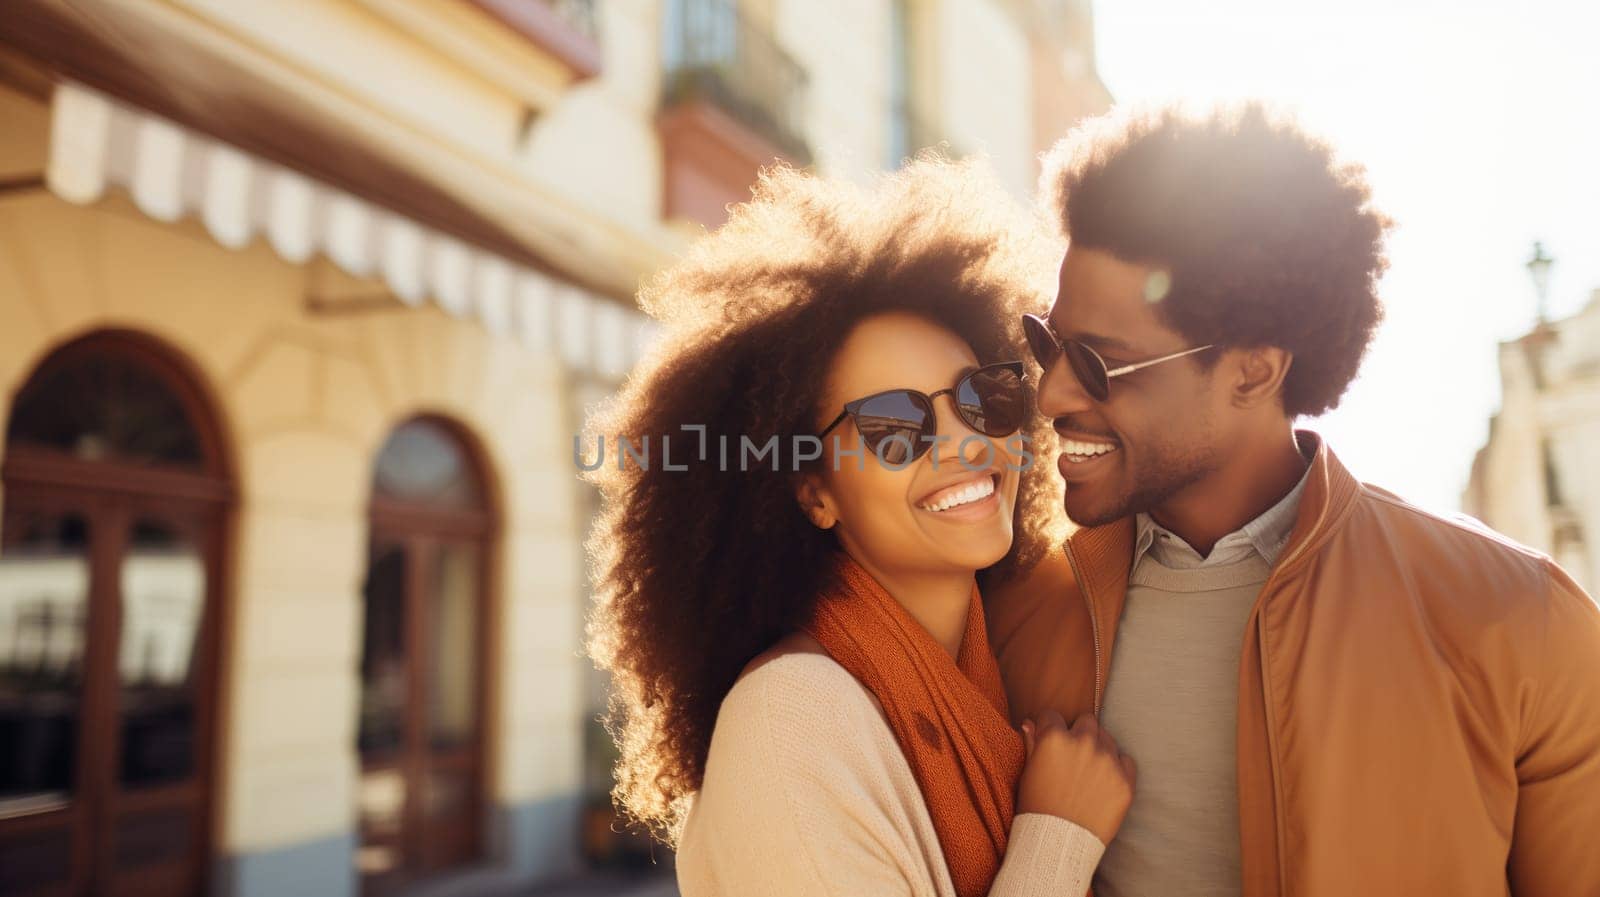 Lifestyle portrait of happy smiling young black couple enjoys a summer walk in sunny city